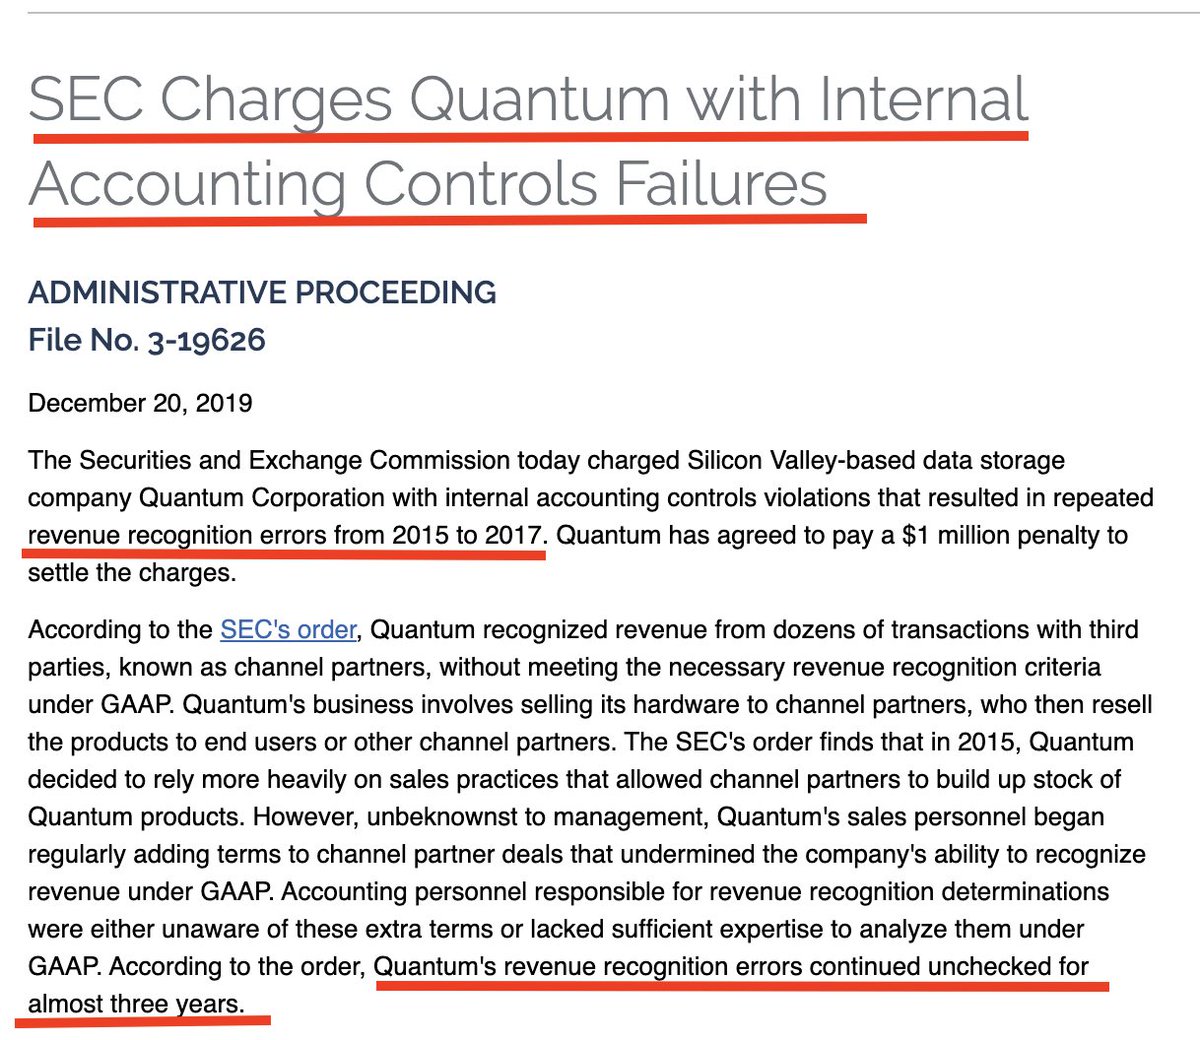 In 2017 Mr. Seel audited Quantum, another tech company. Quantum needed to restate financial over revenue recognition errors and paid $1 million to settle with the SEC.